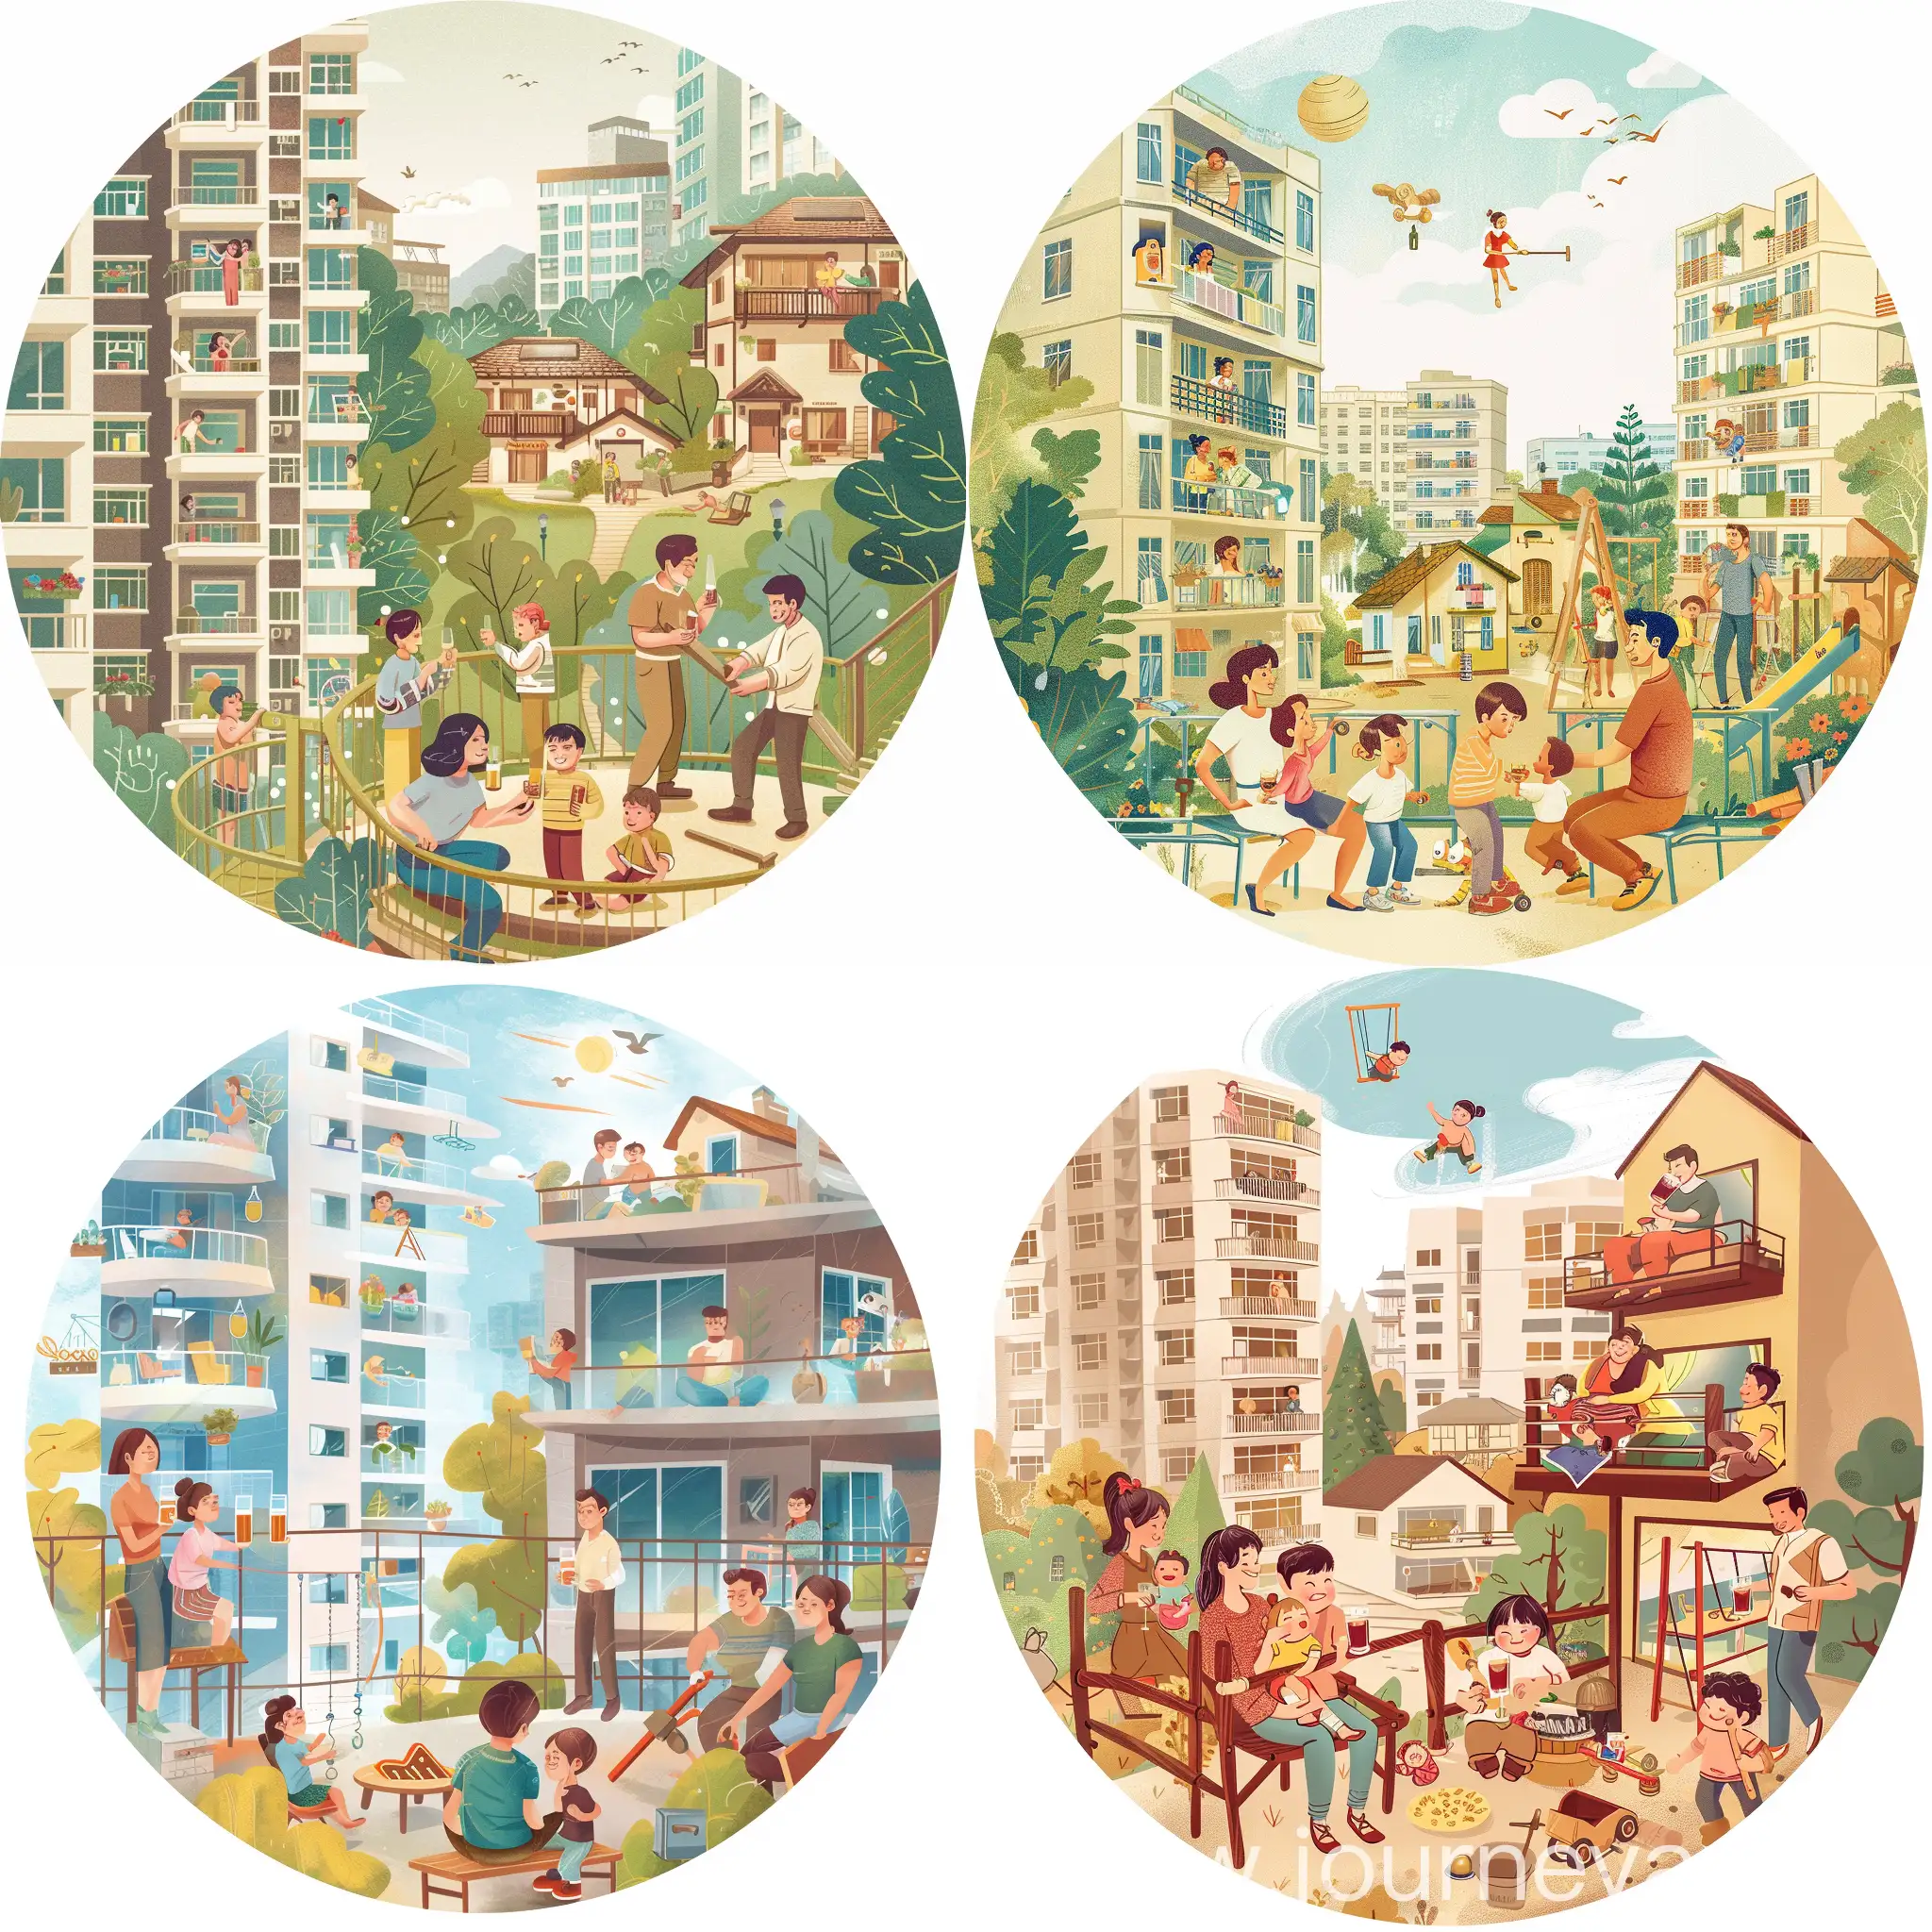 Generate a Disney style picture with a circular shape that: 
* There are to be exactly 2 tall apartment blocks on the left. In one of the blocks, there should be a group of friends on the balcony - 2 women who are drinking proseco, 2 men who are drinking beer. Next to them a 1.5 year old girl and a 3.5 year old boy playing. 
* To the right is supposed to be exactly one small residential house. A man is building a playground, a woman is holding a 1-year-old boy in her arms. In addition, a 3-year-old boy helps his dad holding a hammer. 
* The scenery is very positive and happy, only at the top in the middle add some motif that depicts back pain